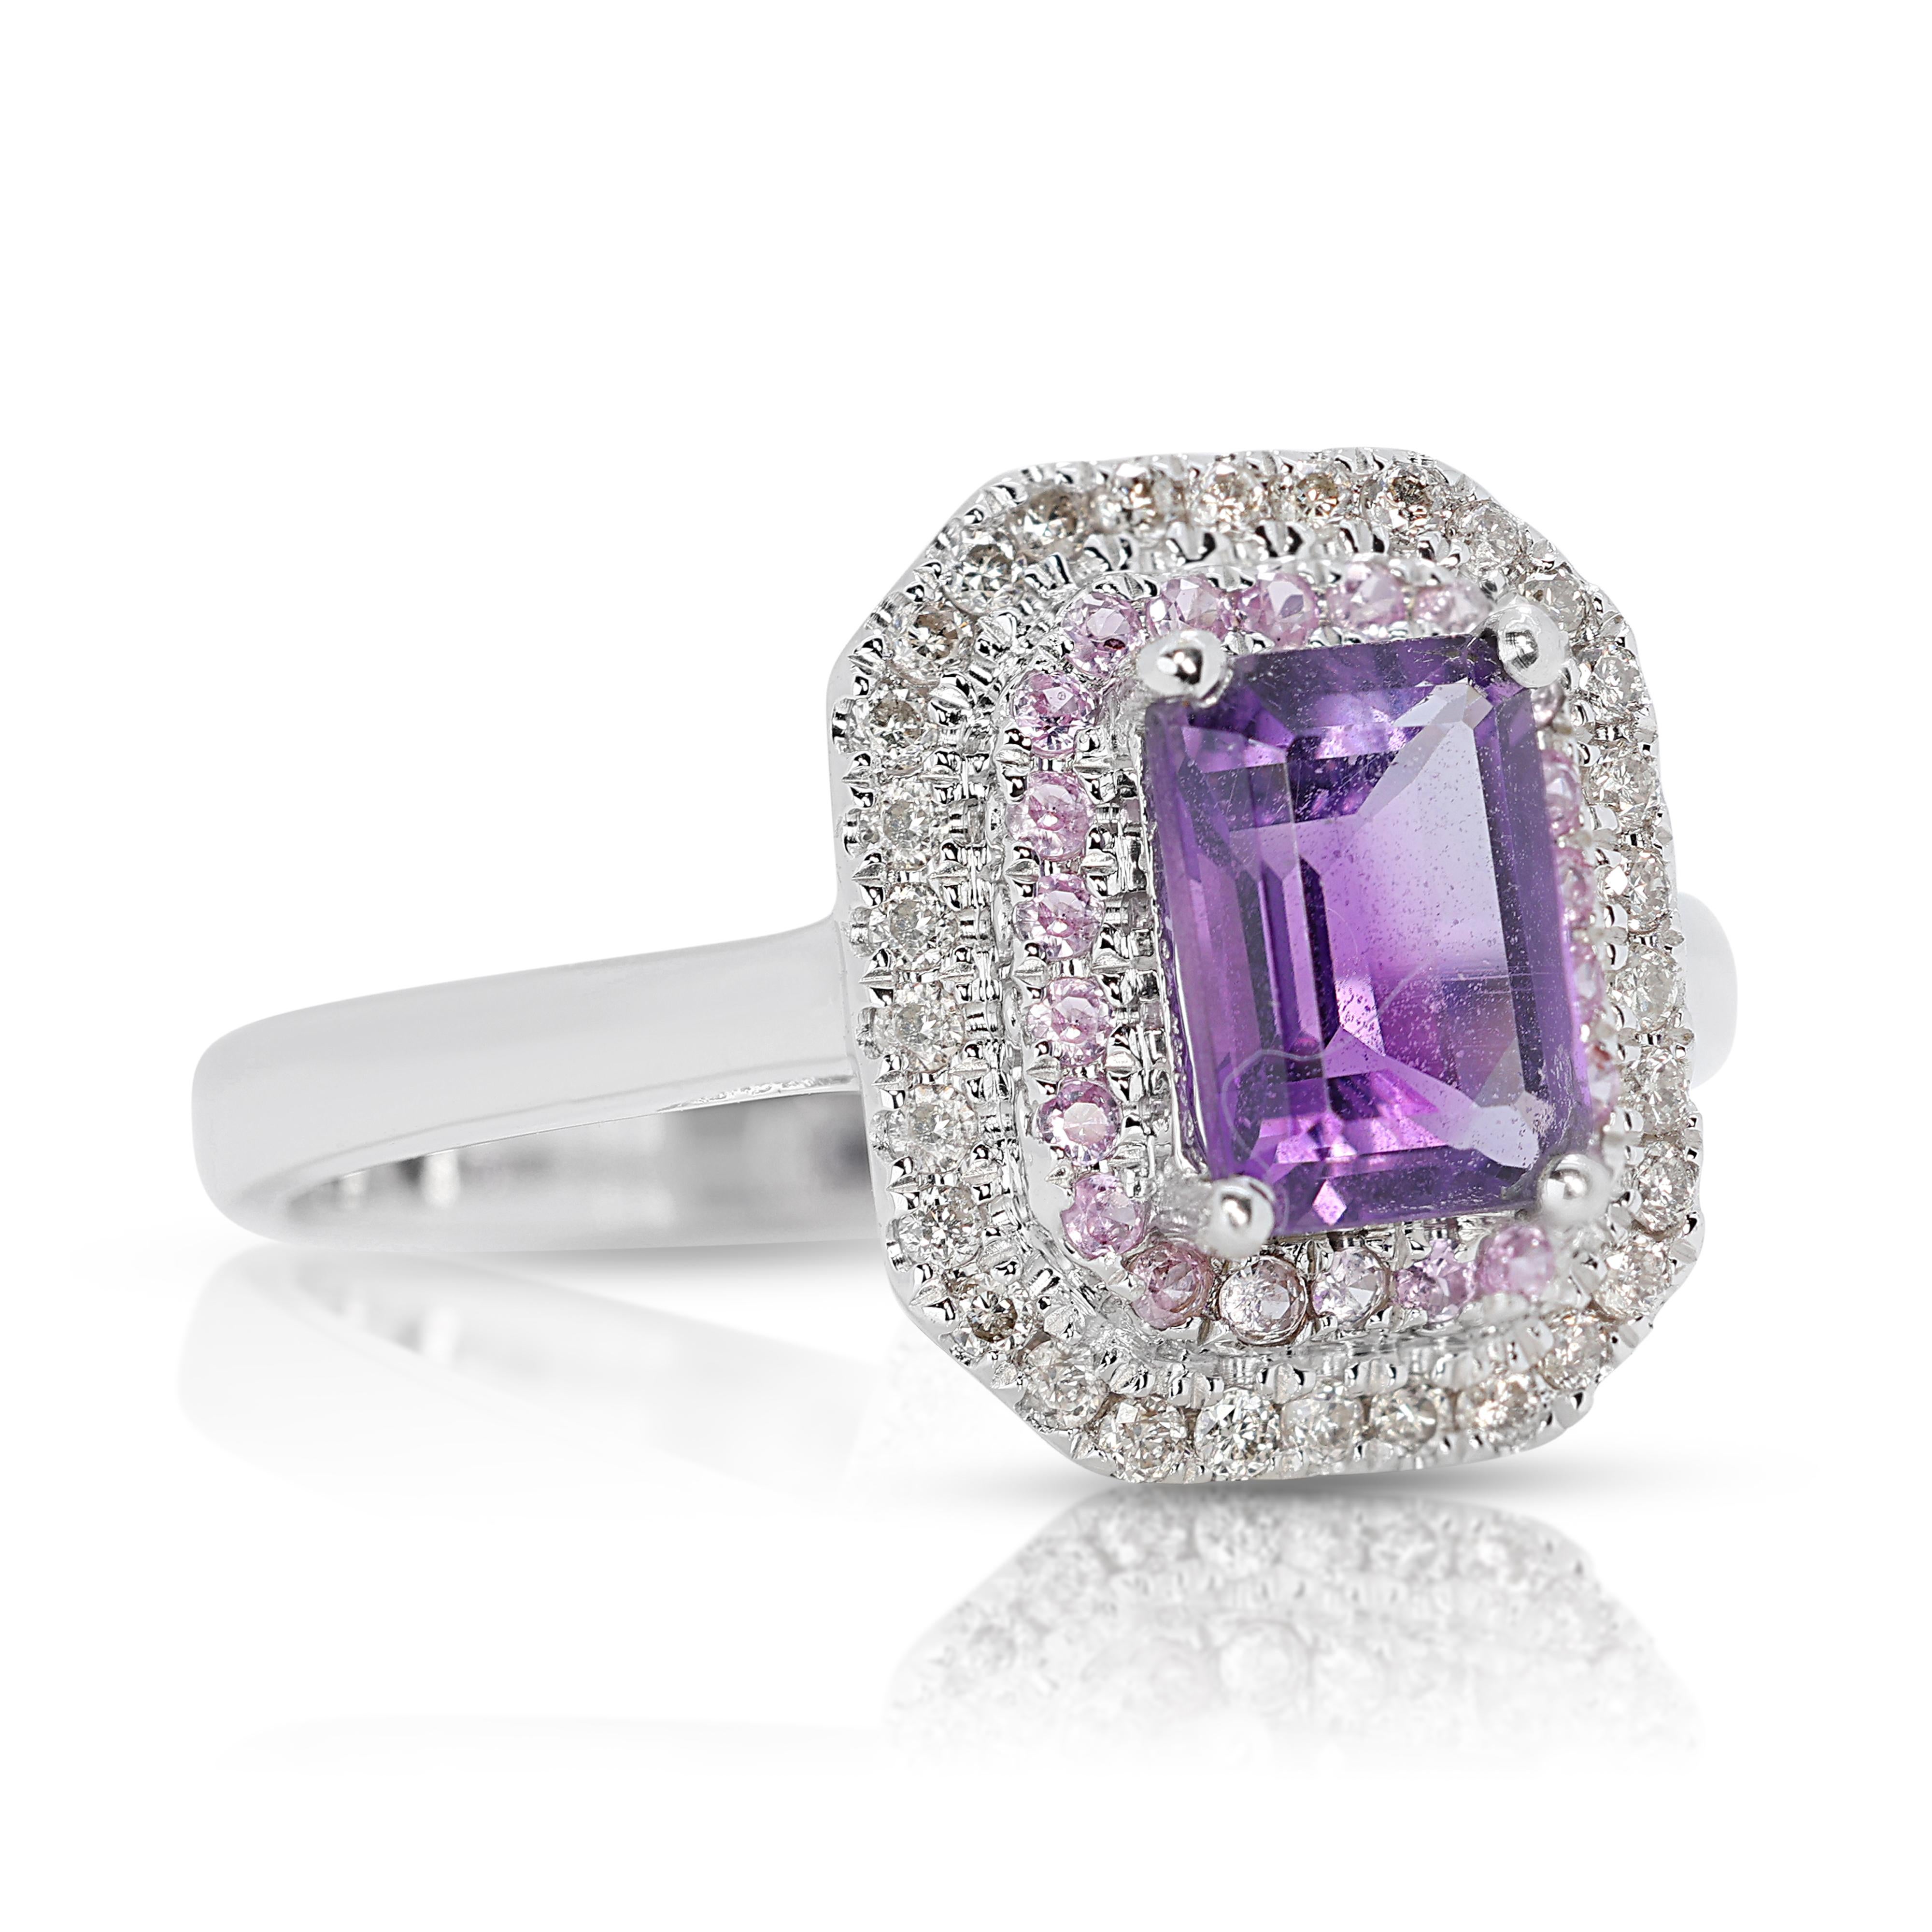 Emerald Cut Stunning 1.35ct Amethyst Double Halo Ring with Gemstones and Diamonds